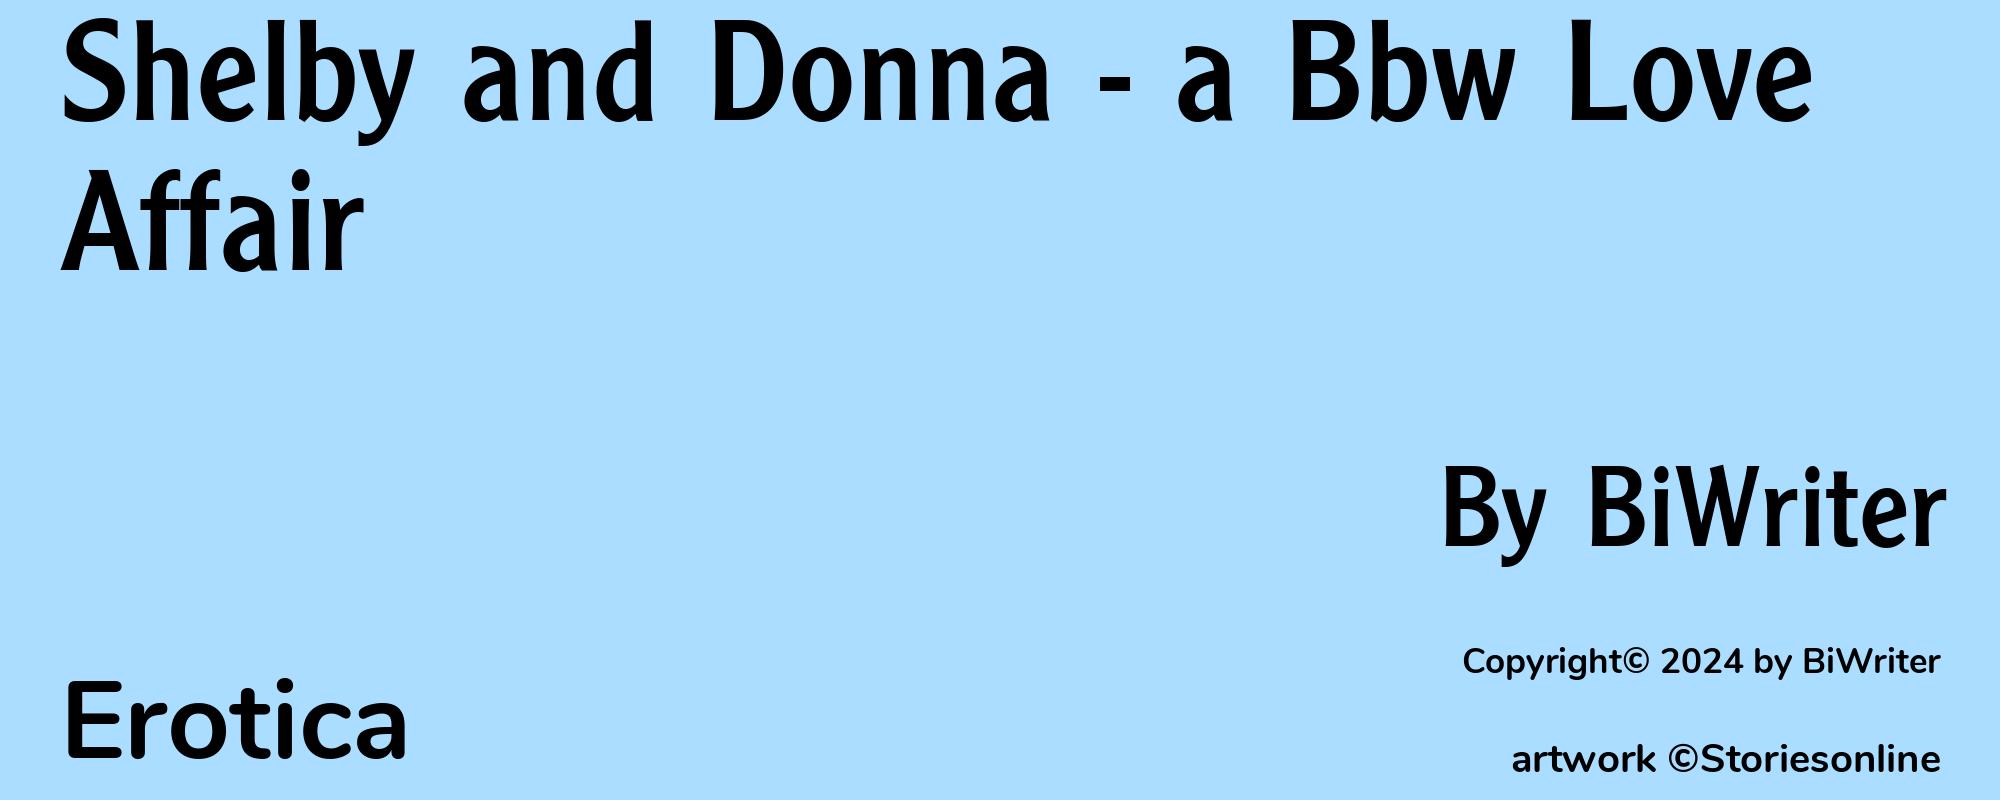 Shelby and Donna - a Bbw Love Affair - Cover